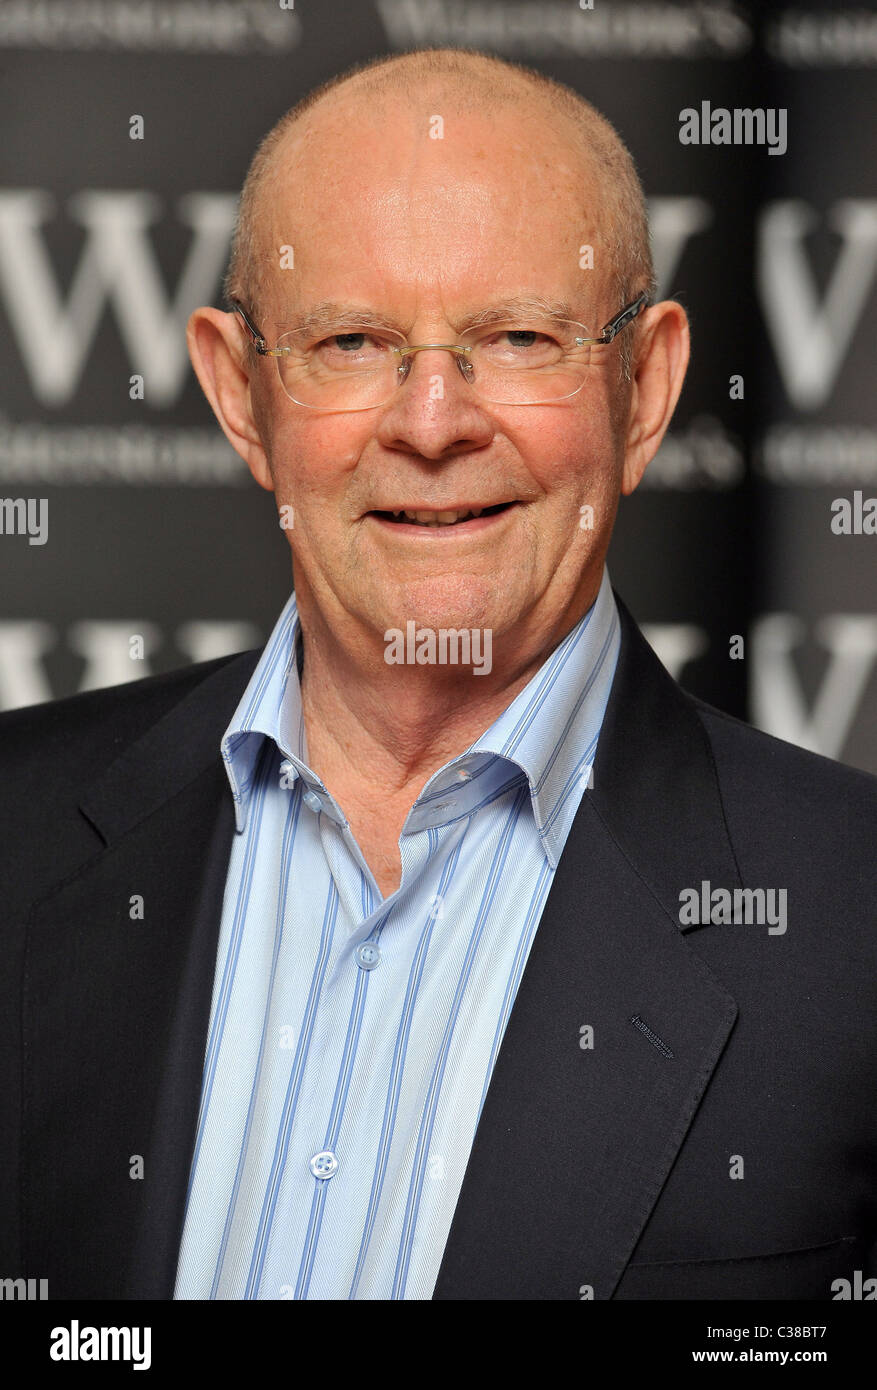 Wilbur Smith Book signing of 'Assegai' held at Waterstone's Piccadilly London, England - 06.04.09 : Stock Photo